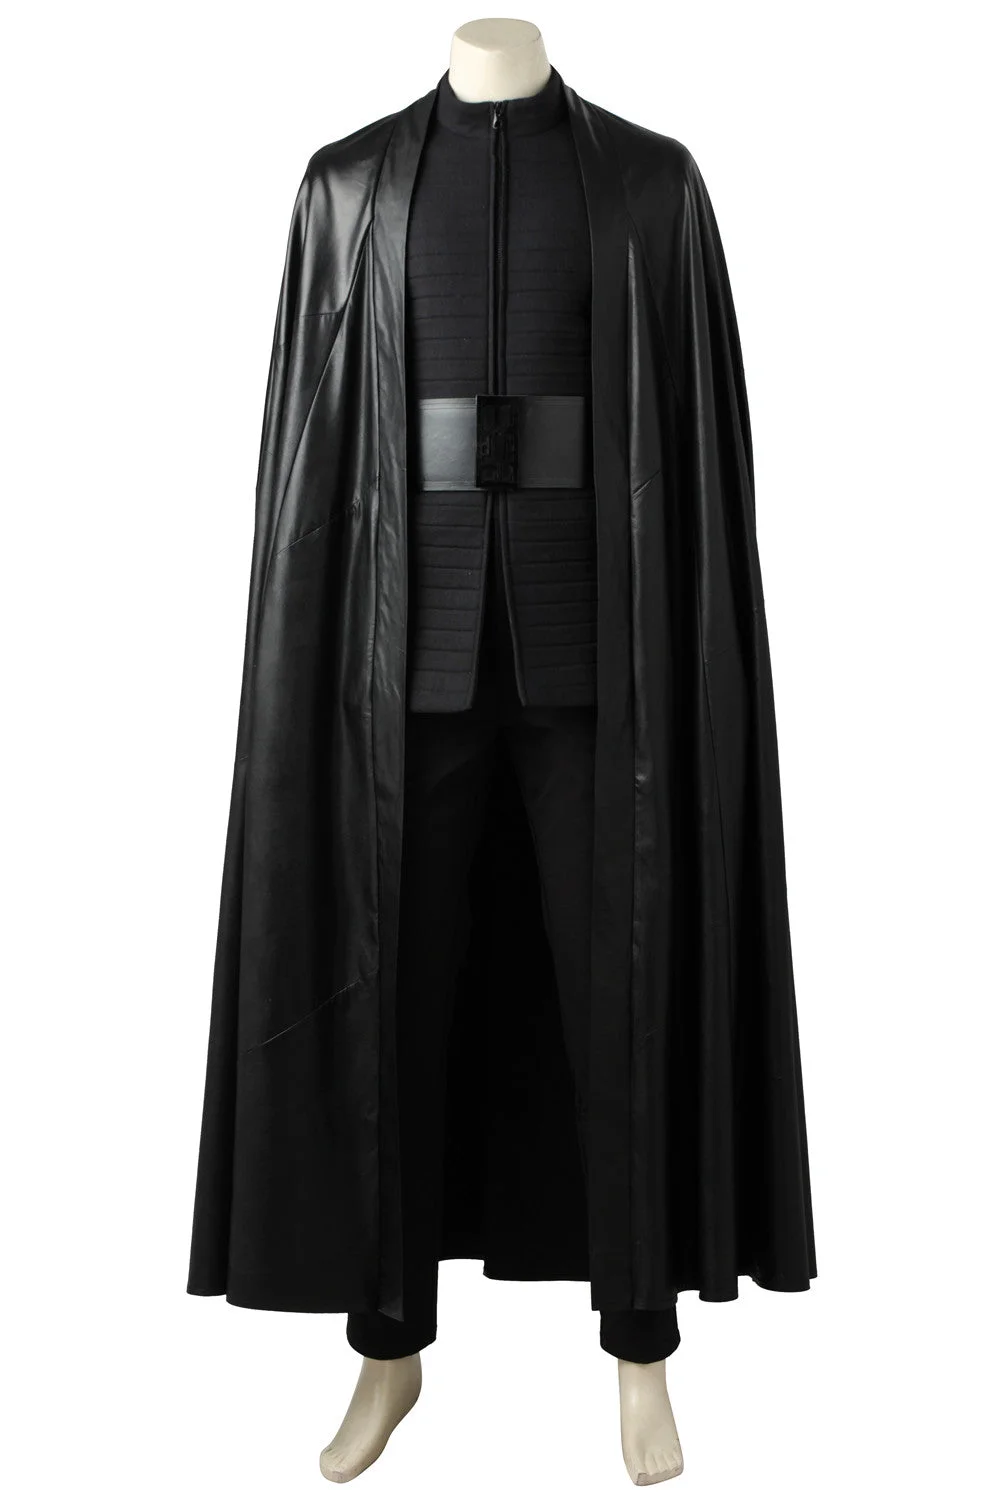 Star Wars 8 The Last Jedi Kylo Ren Outfits Cosplay Costume